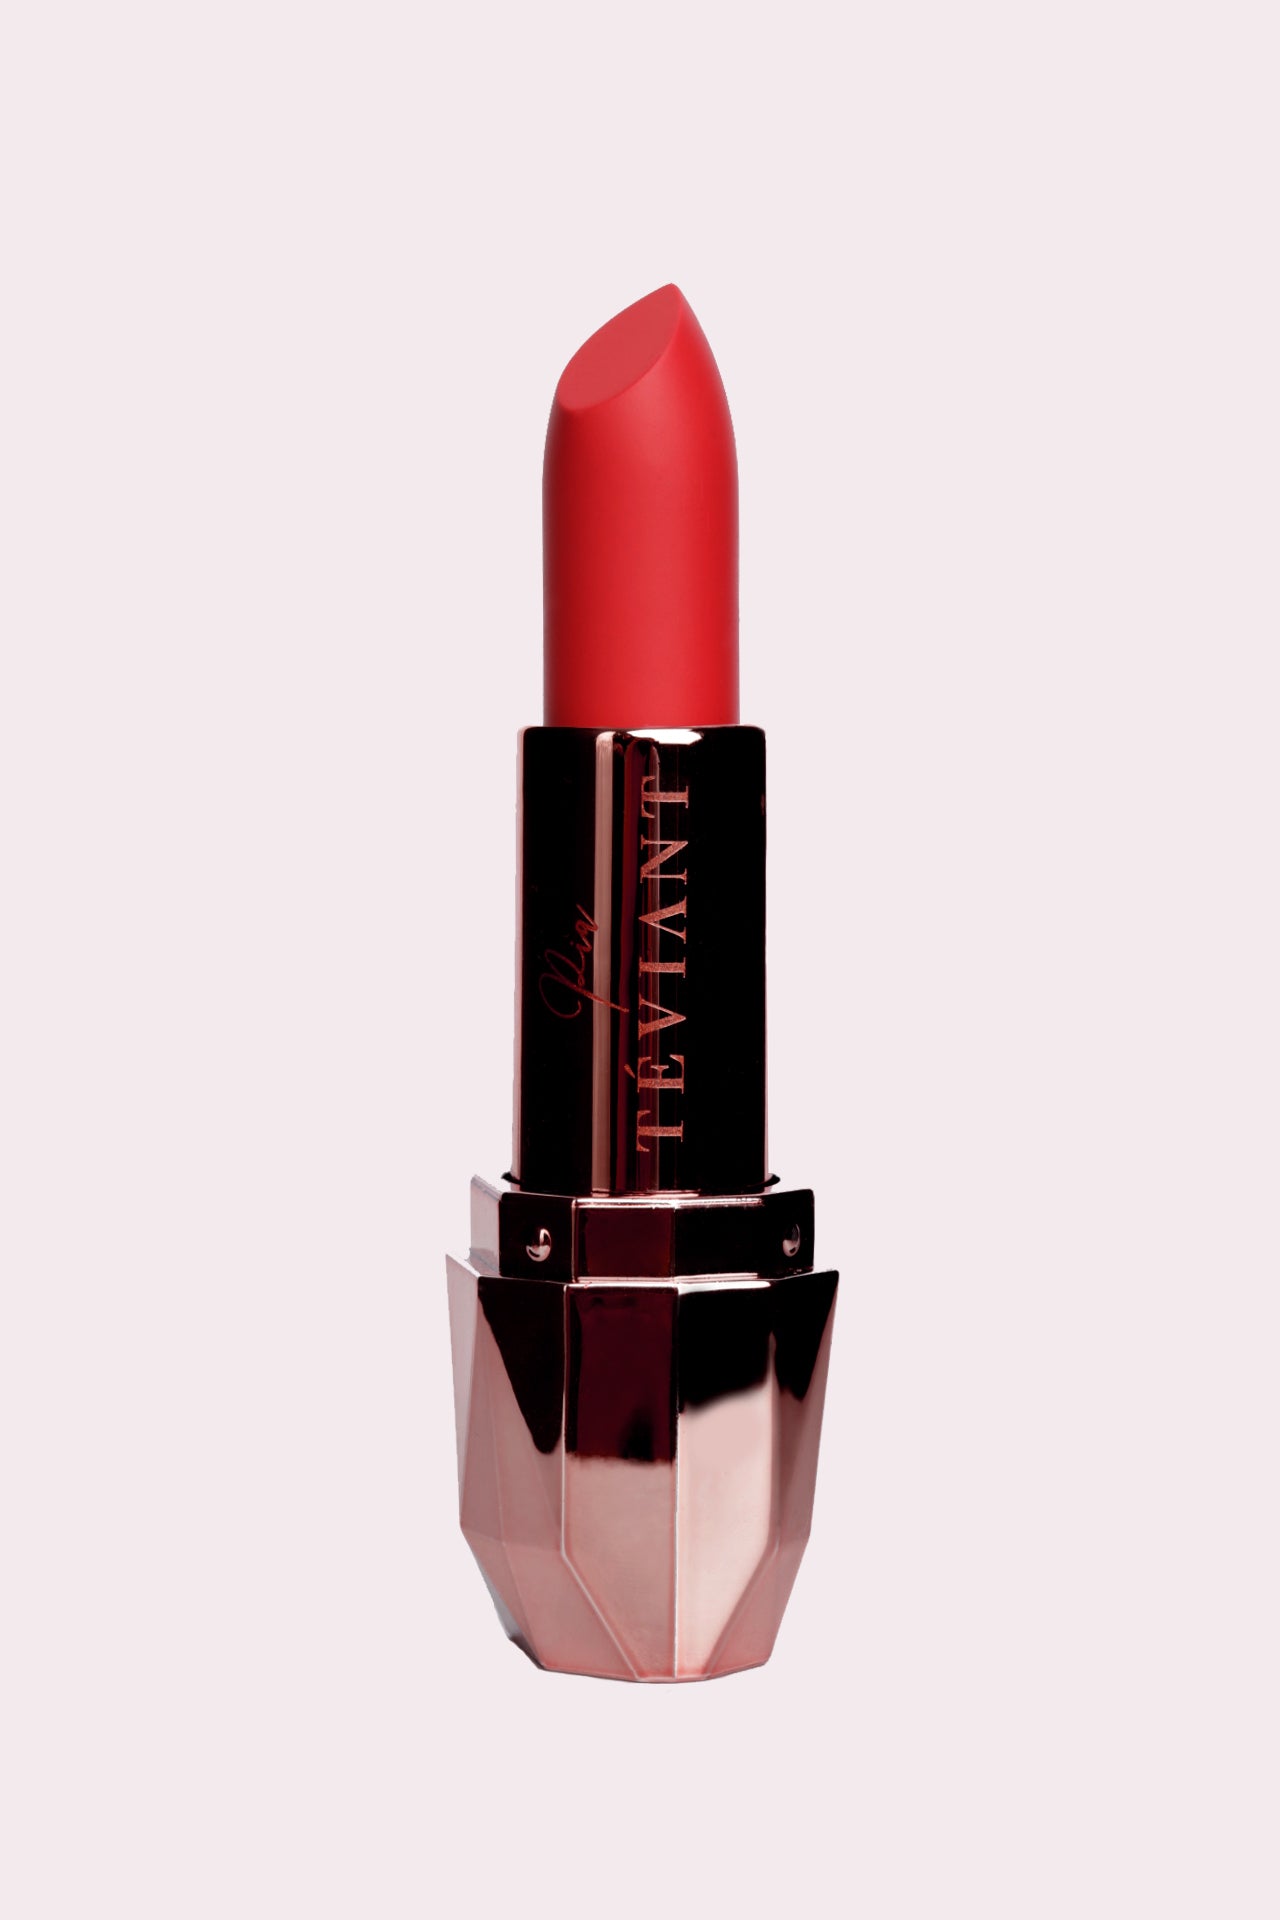 CLAIM TO FAME LIP SPELL LIPSTICK - Teviant Beauty